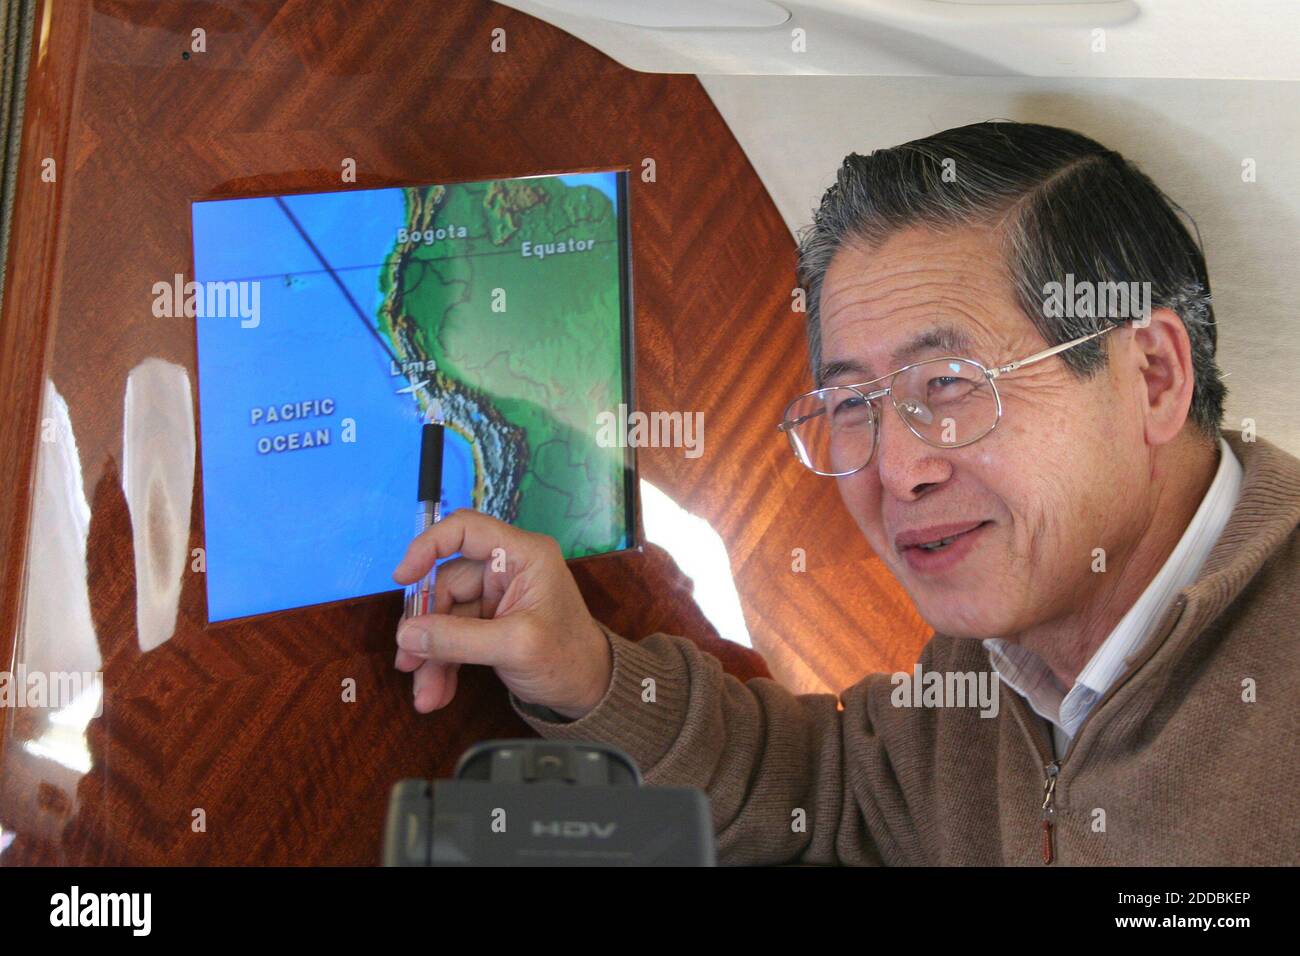 NO FILM, NO VIDEO, NO TV, NO DOCUMENTARY - Former president of Peru Alberto Fujimori is shown November 6, 2005, as he studies a map on an airplane of the border between Chile and Peru. Fujimori was arrested by Chilean authorities on his arrival. Photo by KRT/ABACAPRESS.COM Stock Photo